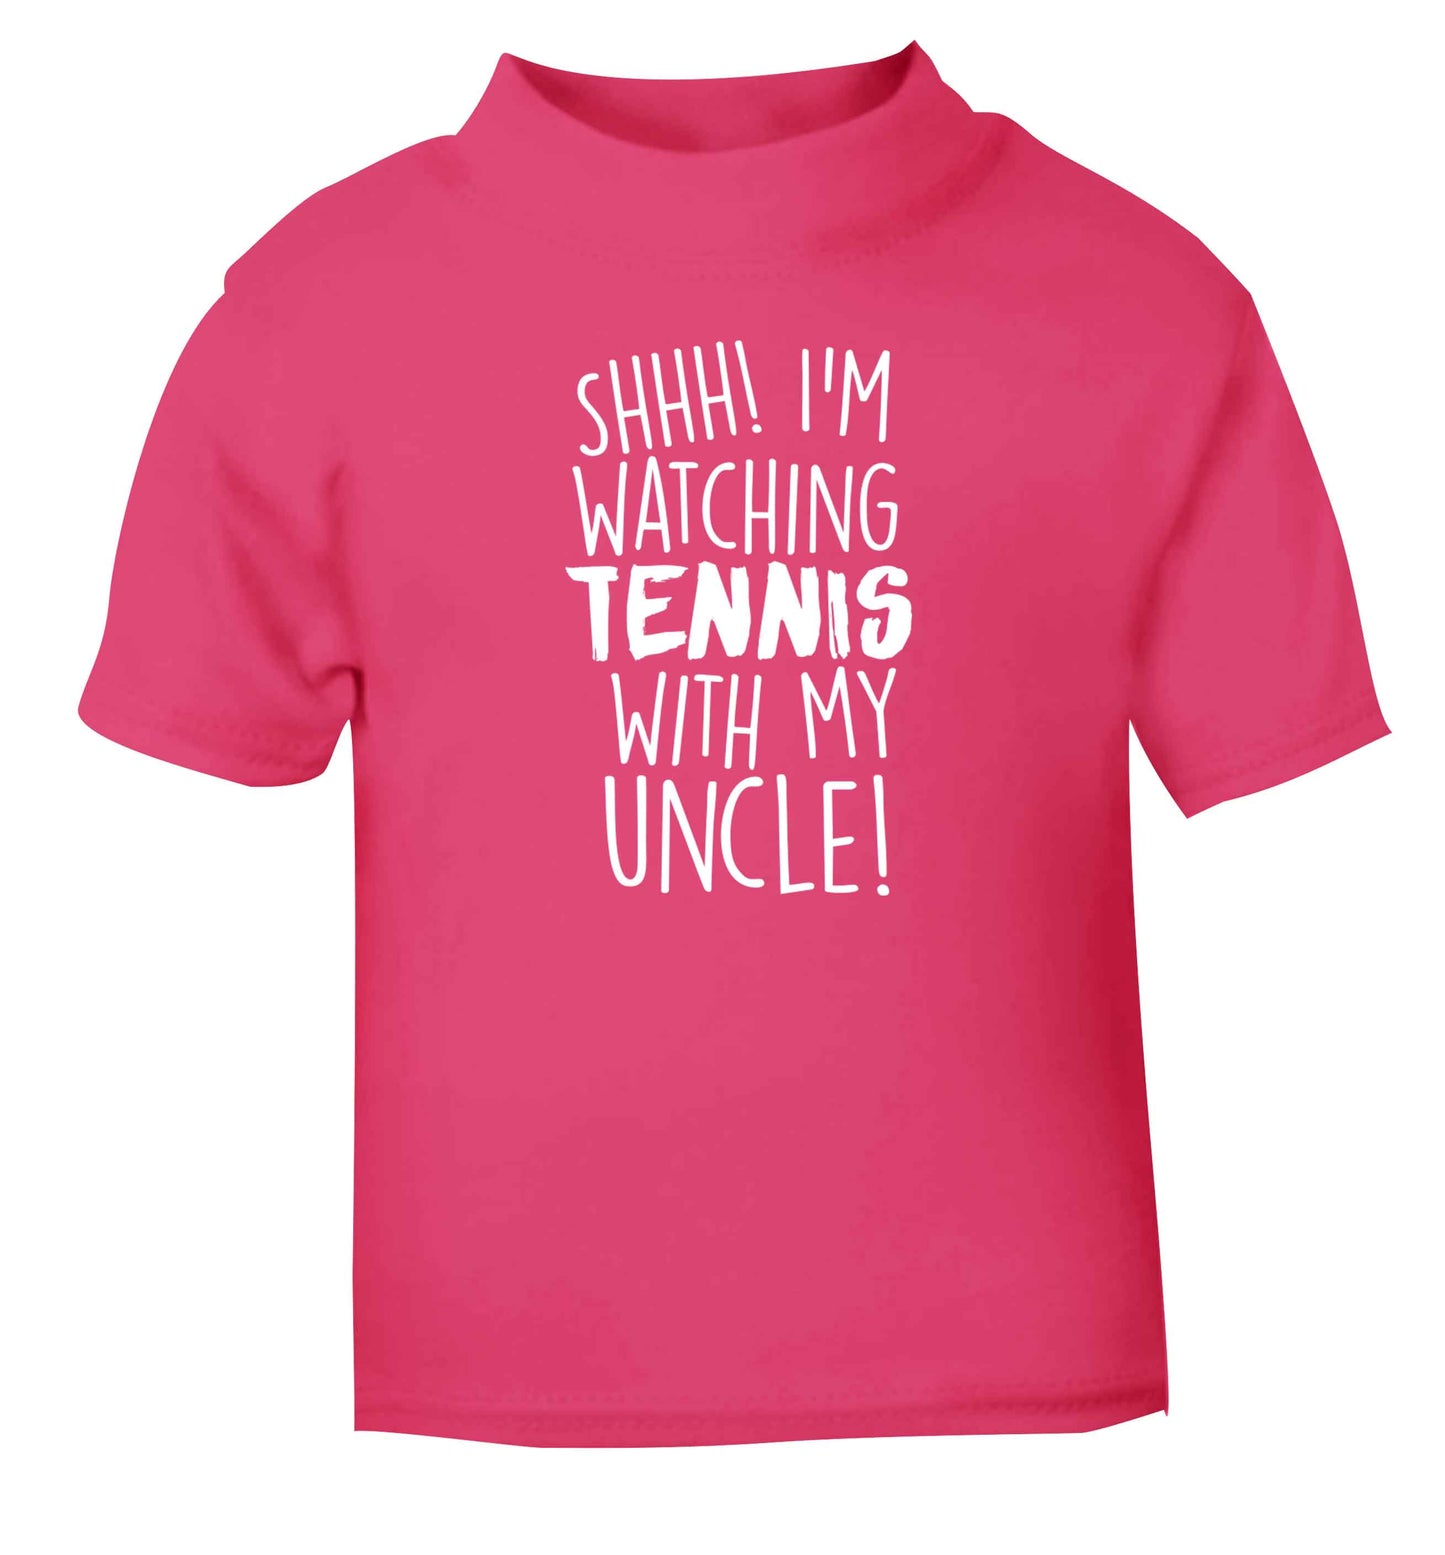 Shh! I'm watching tennis with my uncle! pink Baby Toddler Tshirt 2 Years